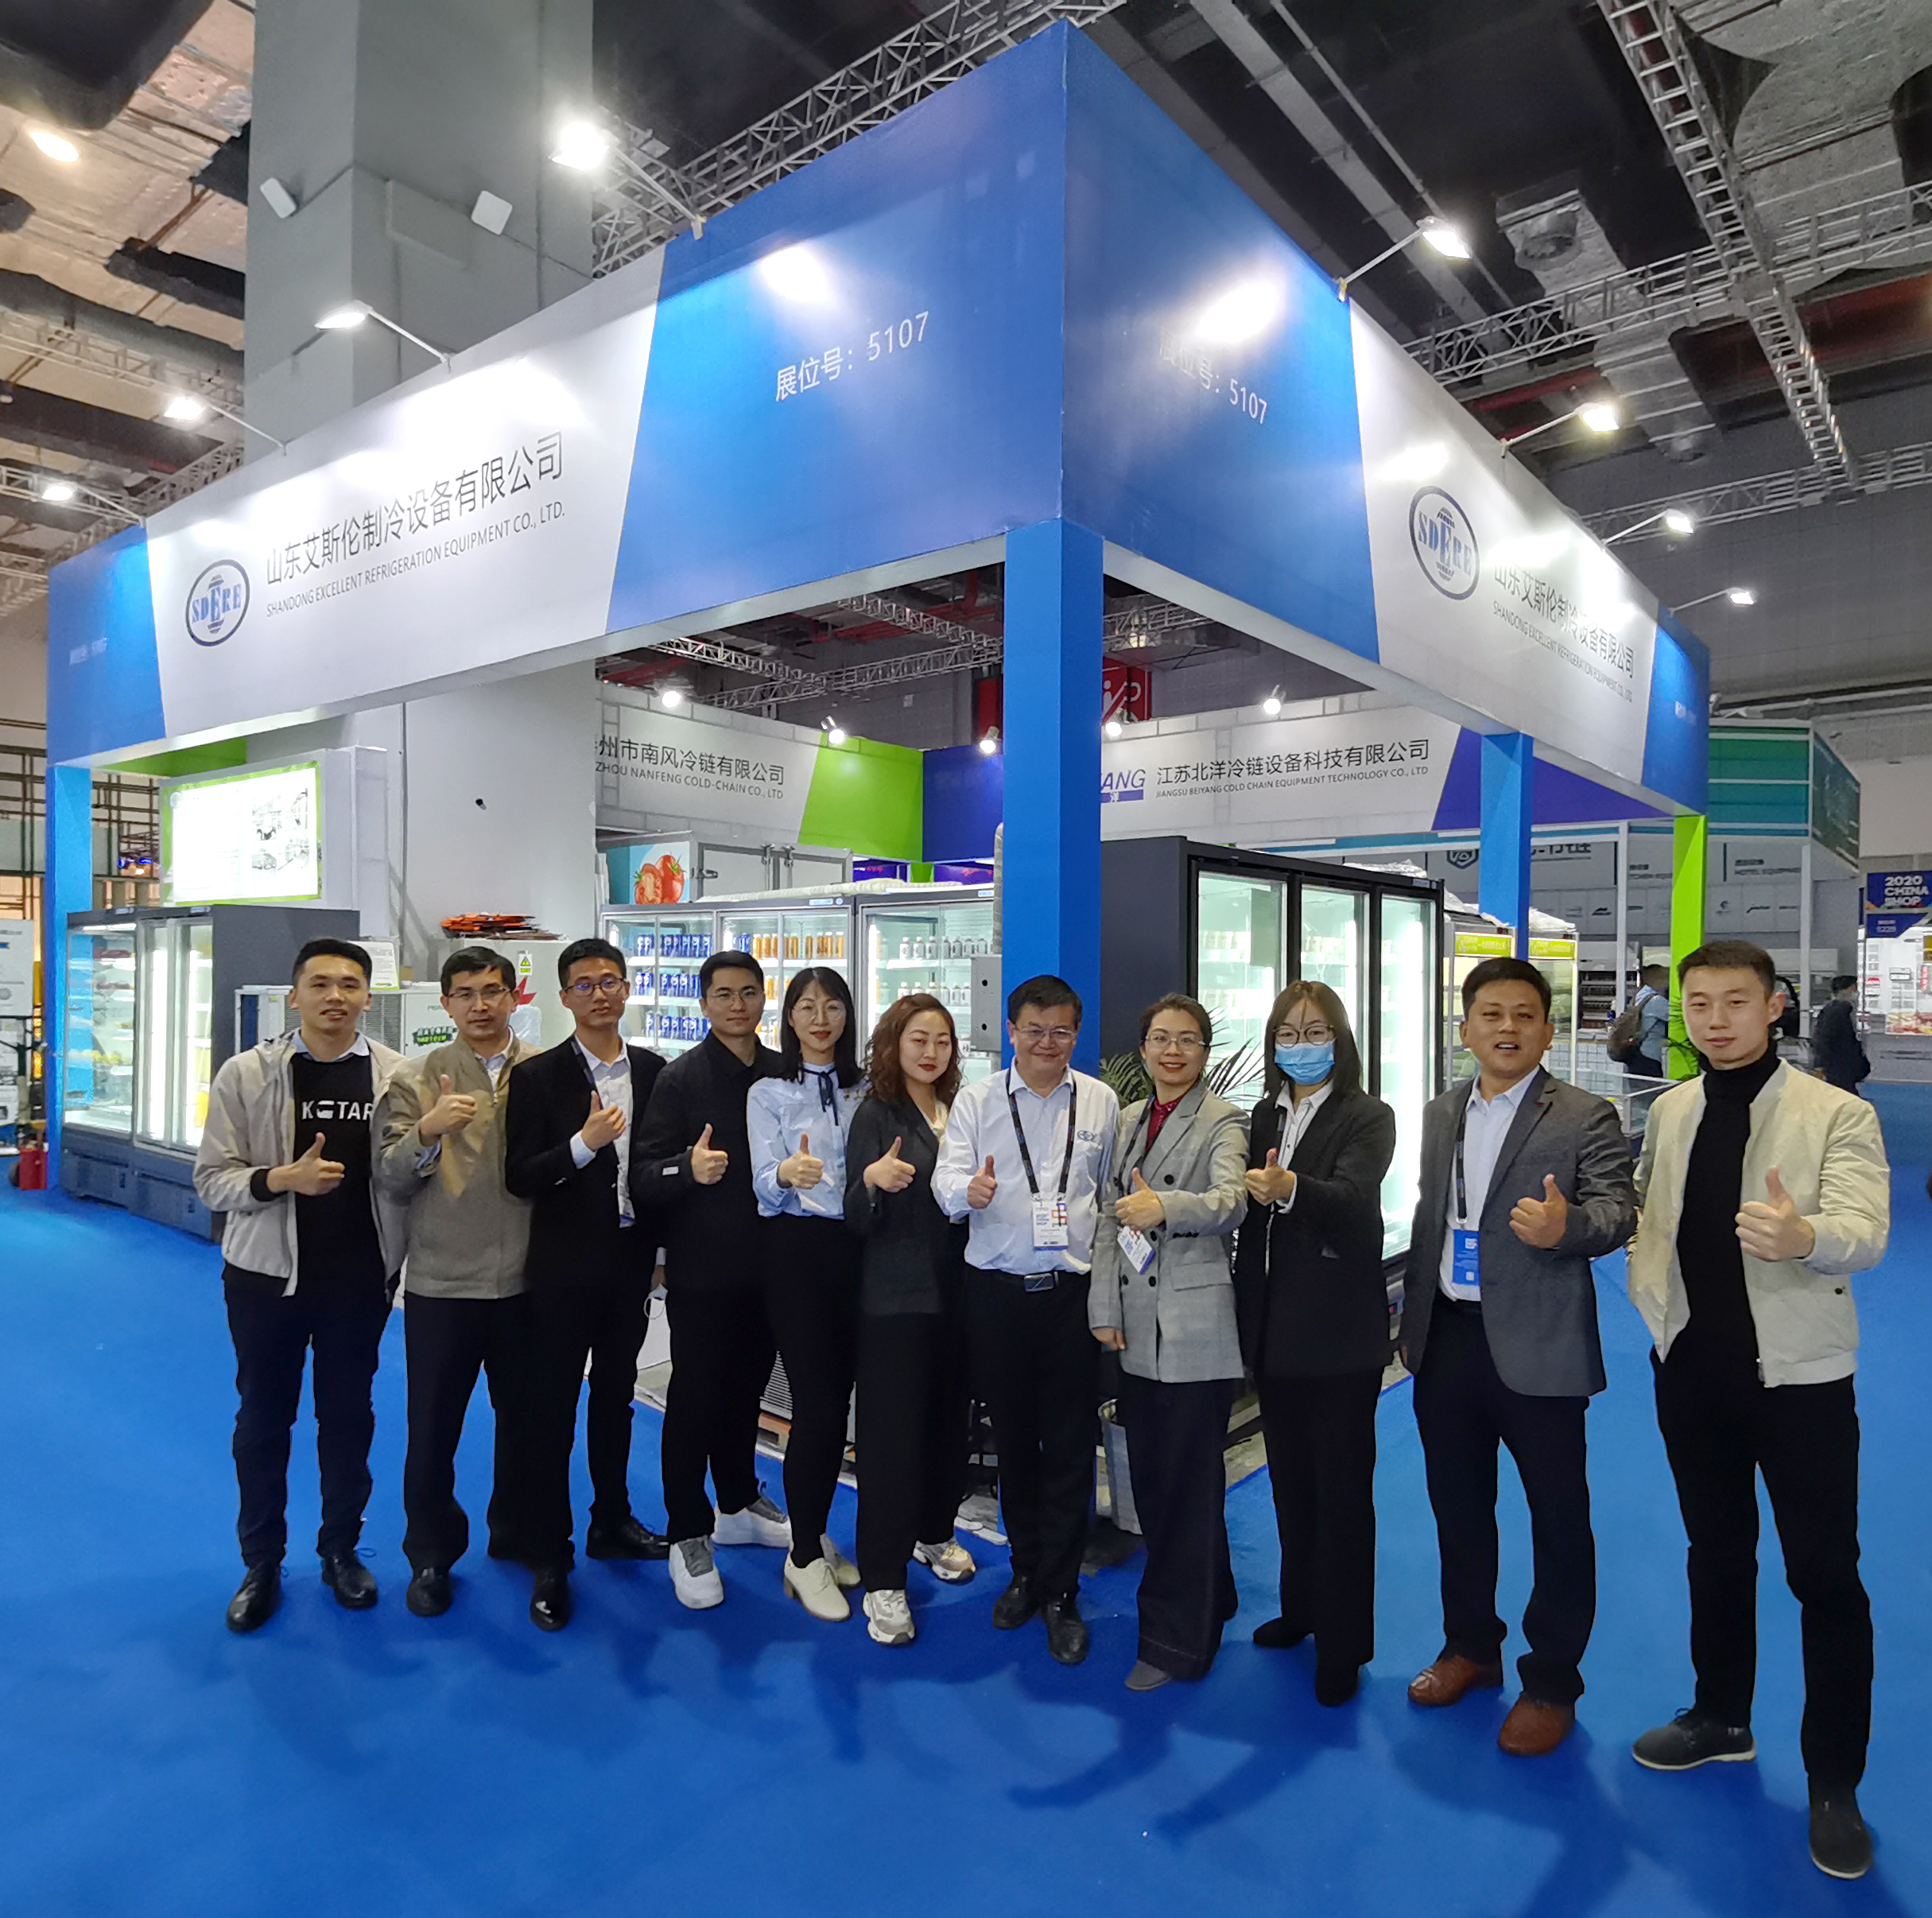 Participate in the 22nd China Retail Expo in 2020